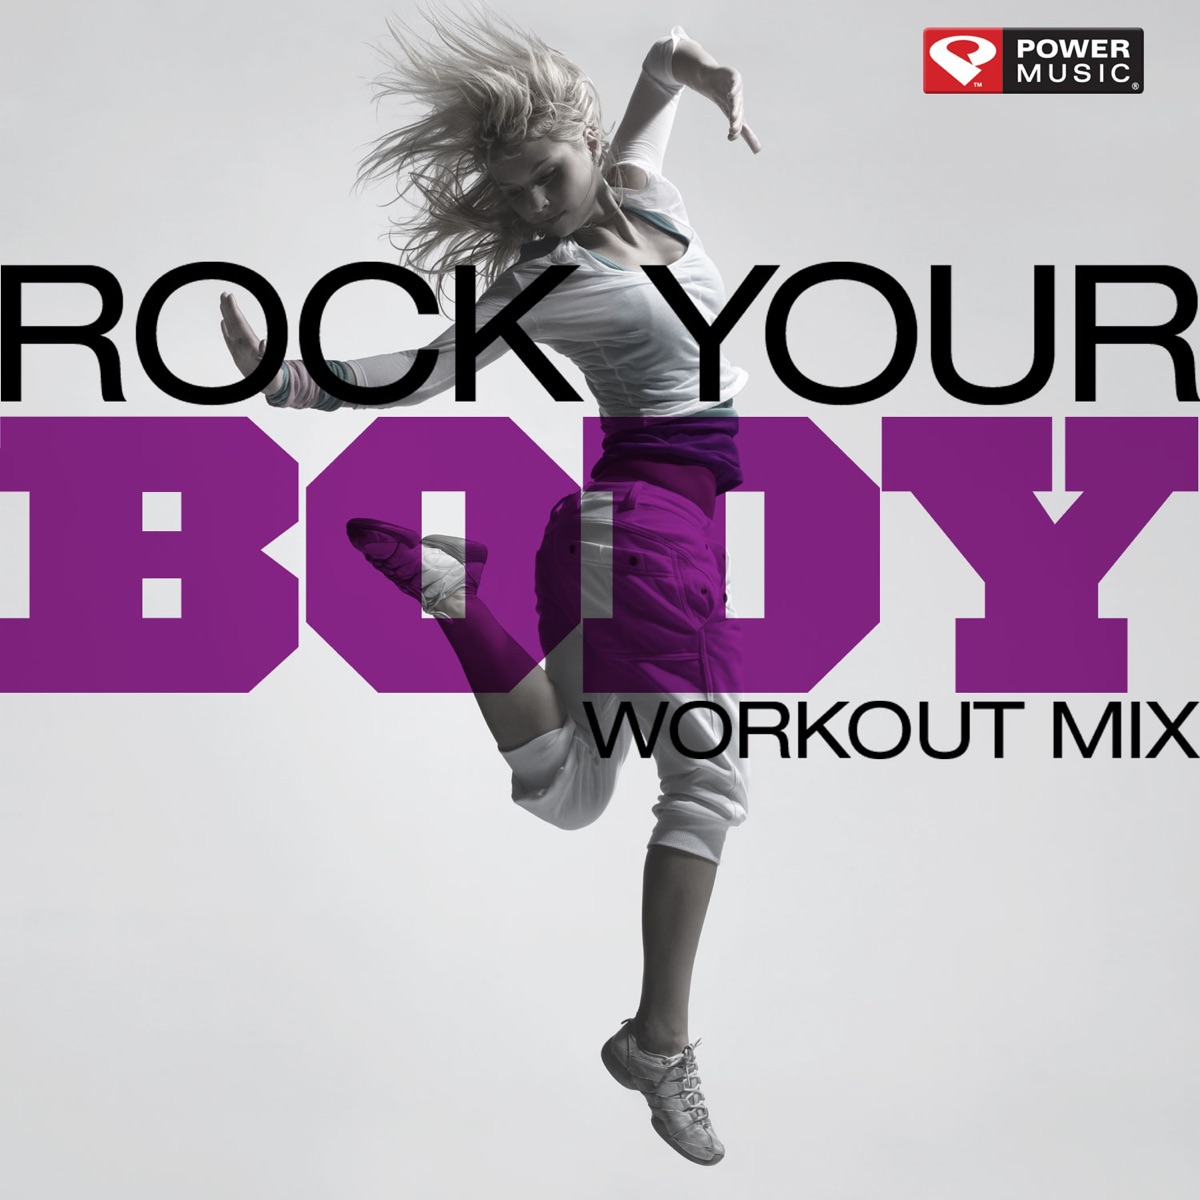 Rock Your Body Workout Mix (60 Minute Non-Stop Workout Mix) [130 BPM] -  Album by Power Music Workout - Apple Music